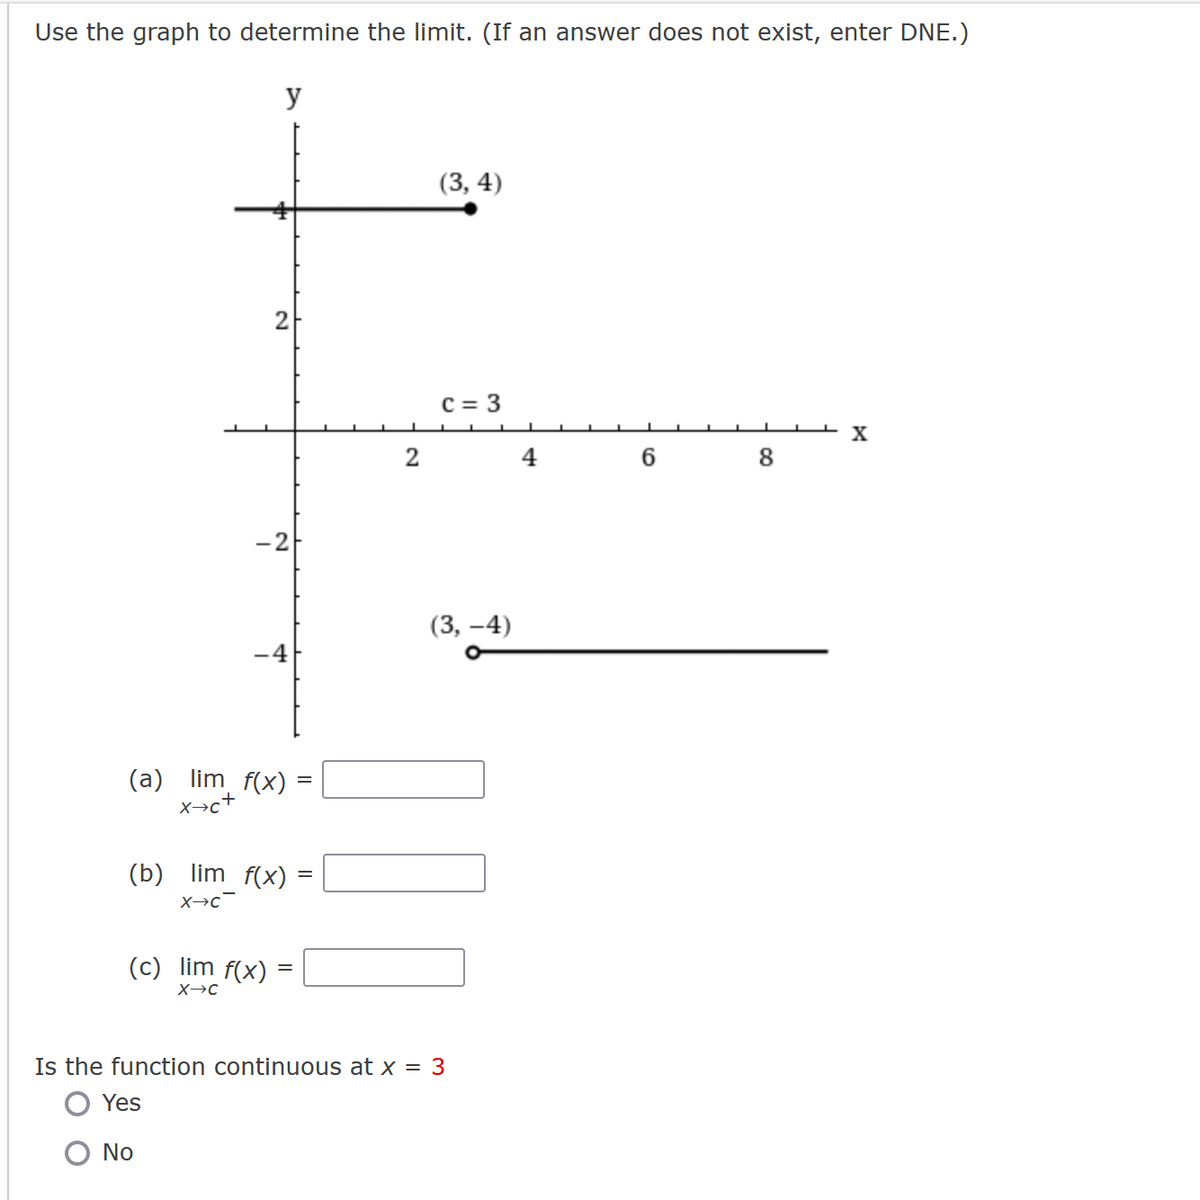 Use the graph to determine the limit. (If an answer does not exist, enter DNE.)
y
2
-2
(a) lim f(x) =
x+c+
(c) lim f(x)
X→C
(b) lim f(x) =
X→C
Ο No
=
2
(3, 4)
C = 3
(3,-4)
Is the function continuous at x = 3
Yes
L
4
6
CO
8
X